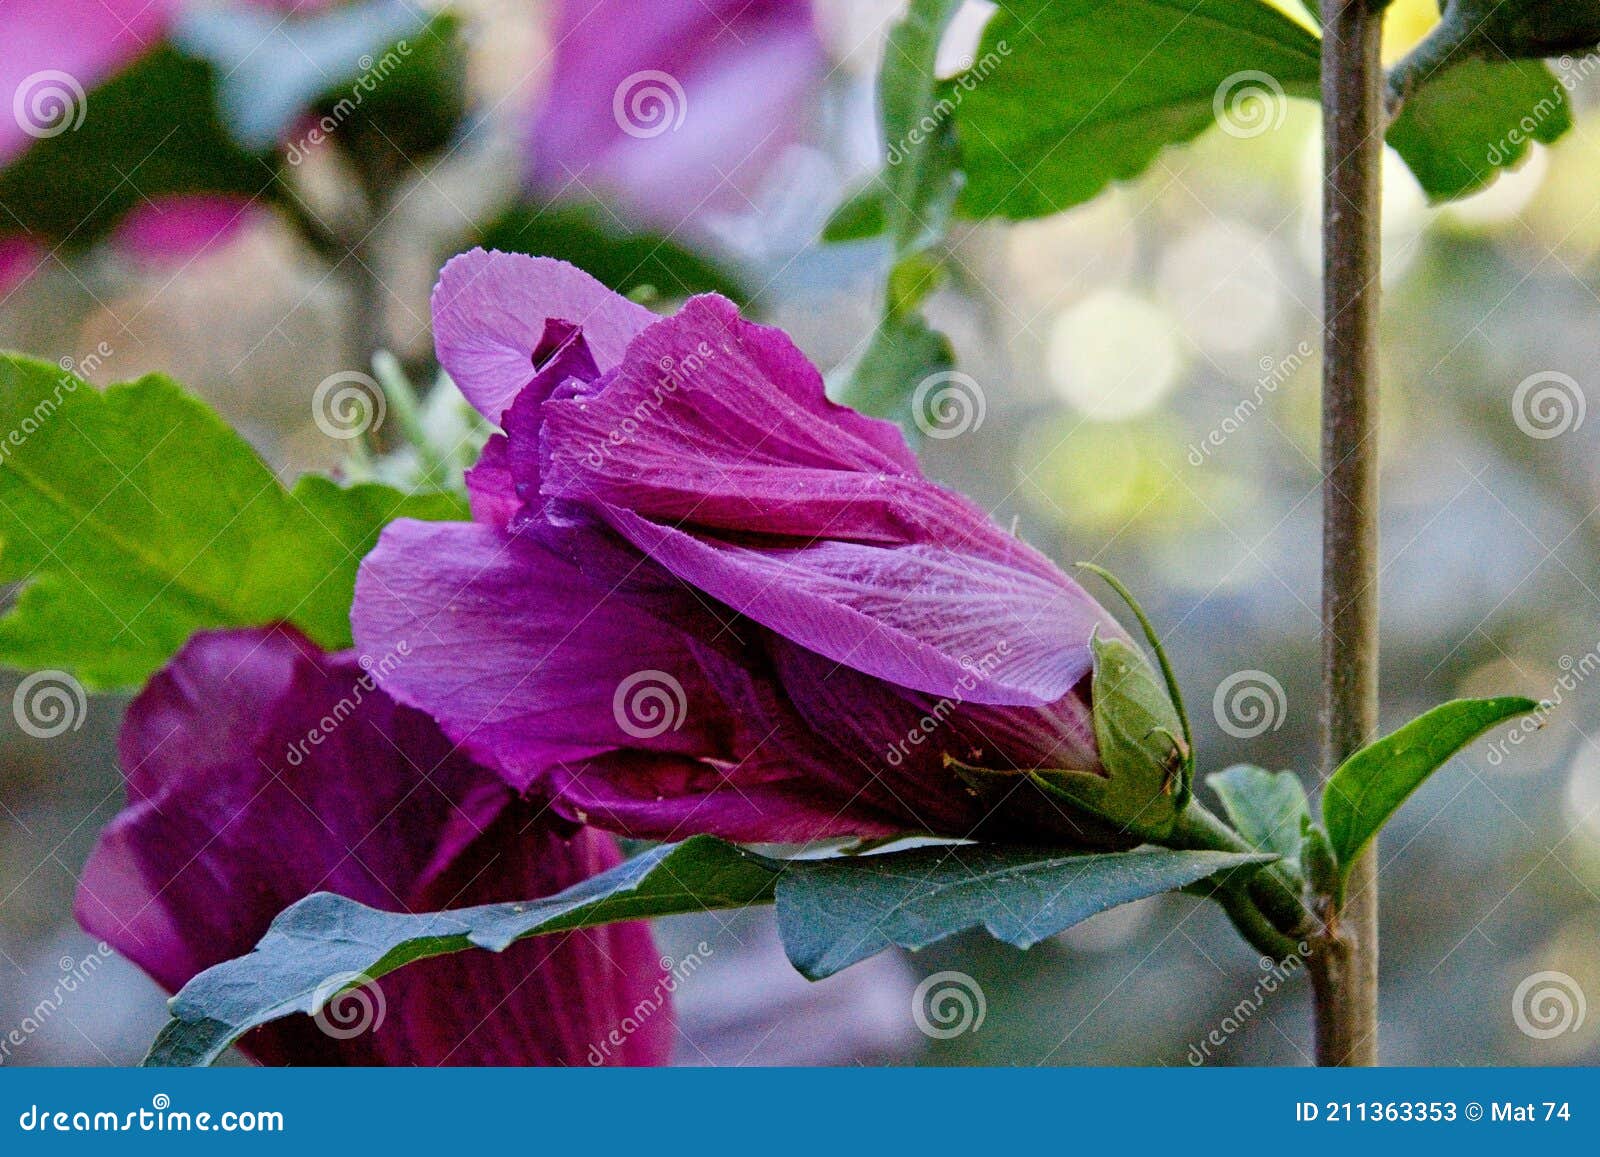 Purple and yellow flowers stock image. Image of pollinate - 211363353